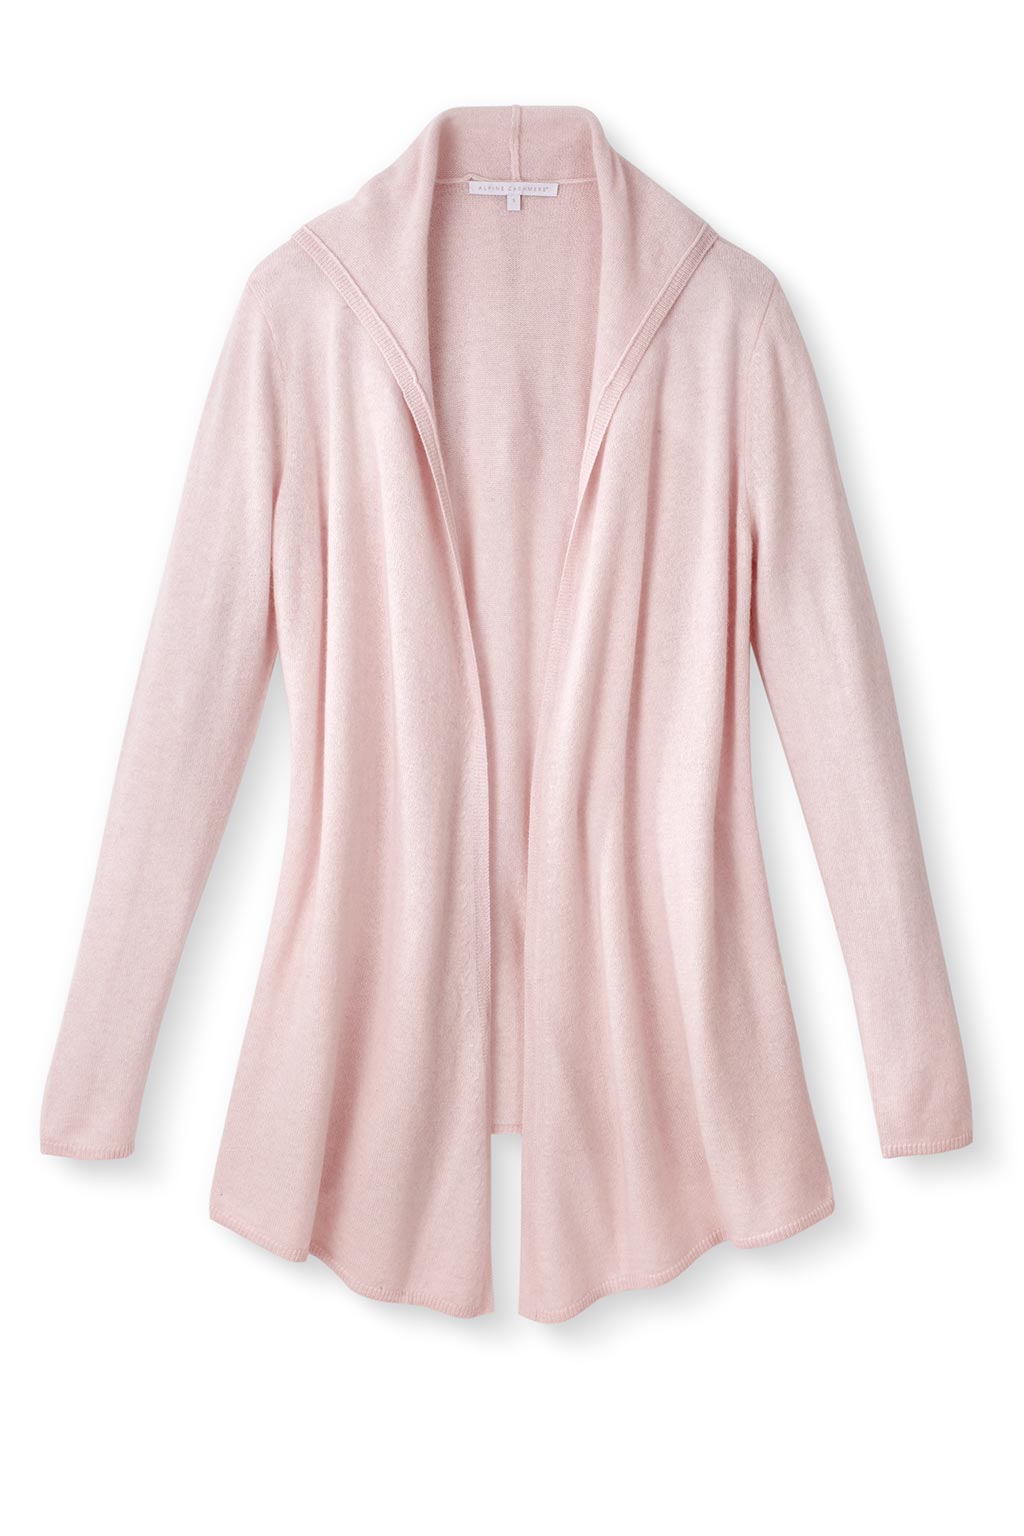 Alpine Cashmere's 100% Cashmere Casual Hoodie in Ballet Pink, Chosen as Oprah's Favorite Thing in 2020